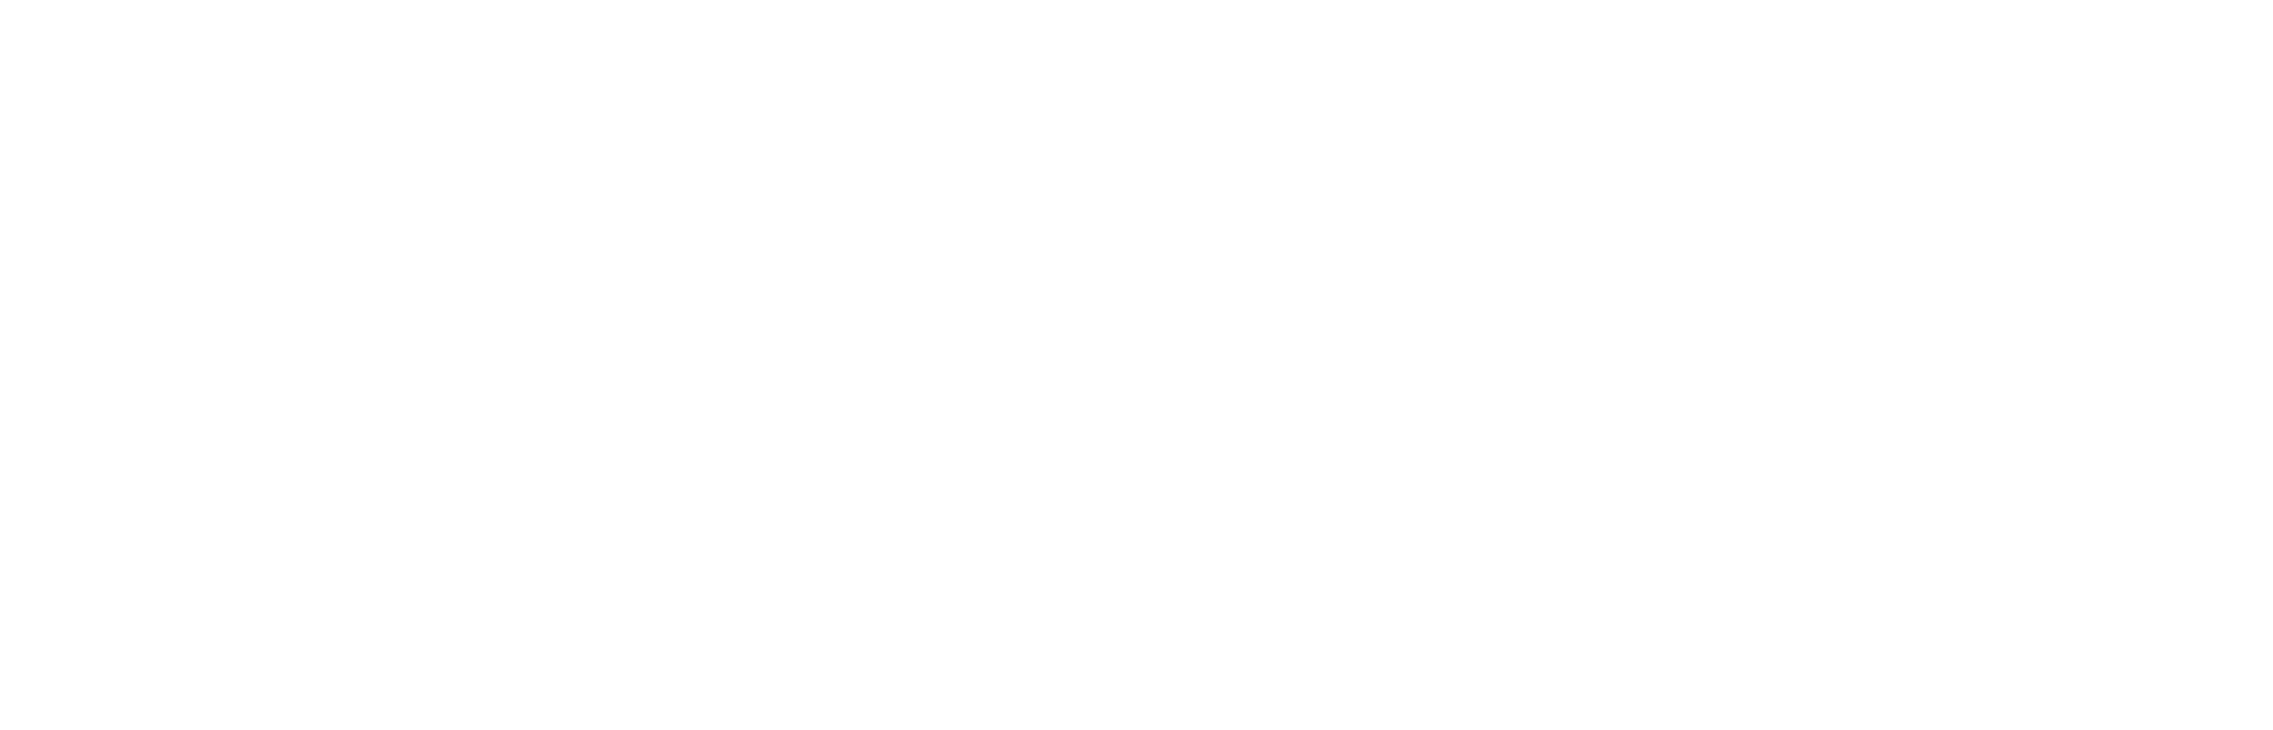 Midwest Industrial Products Logo